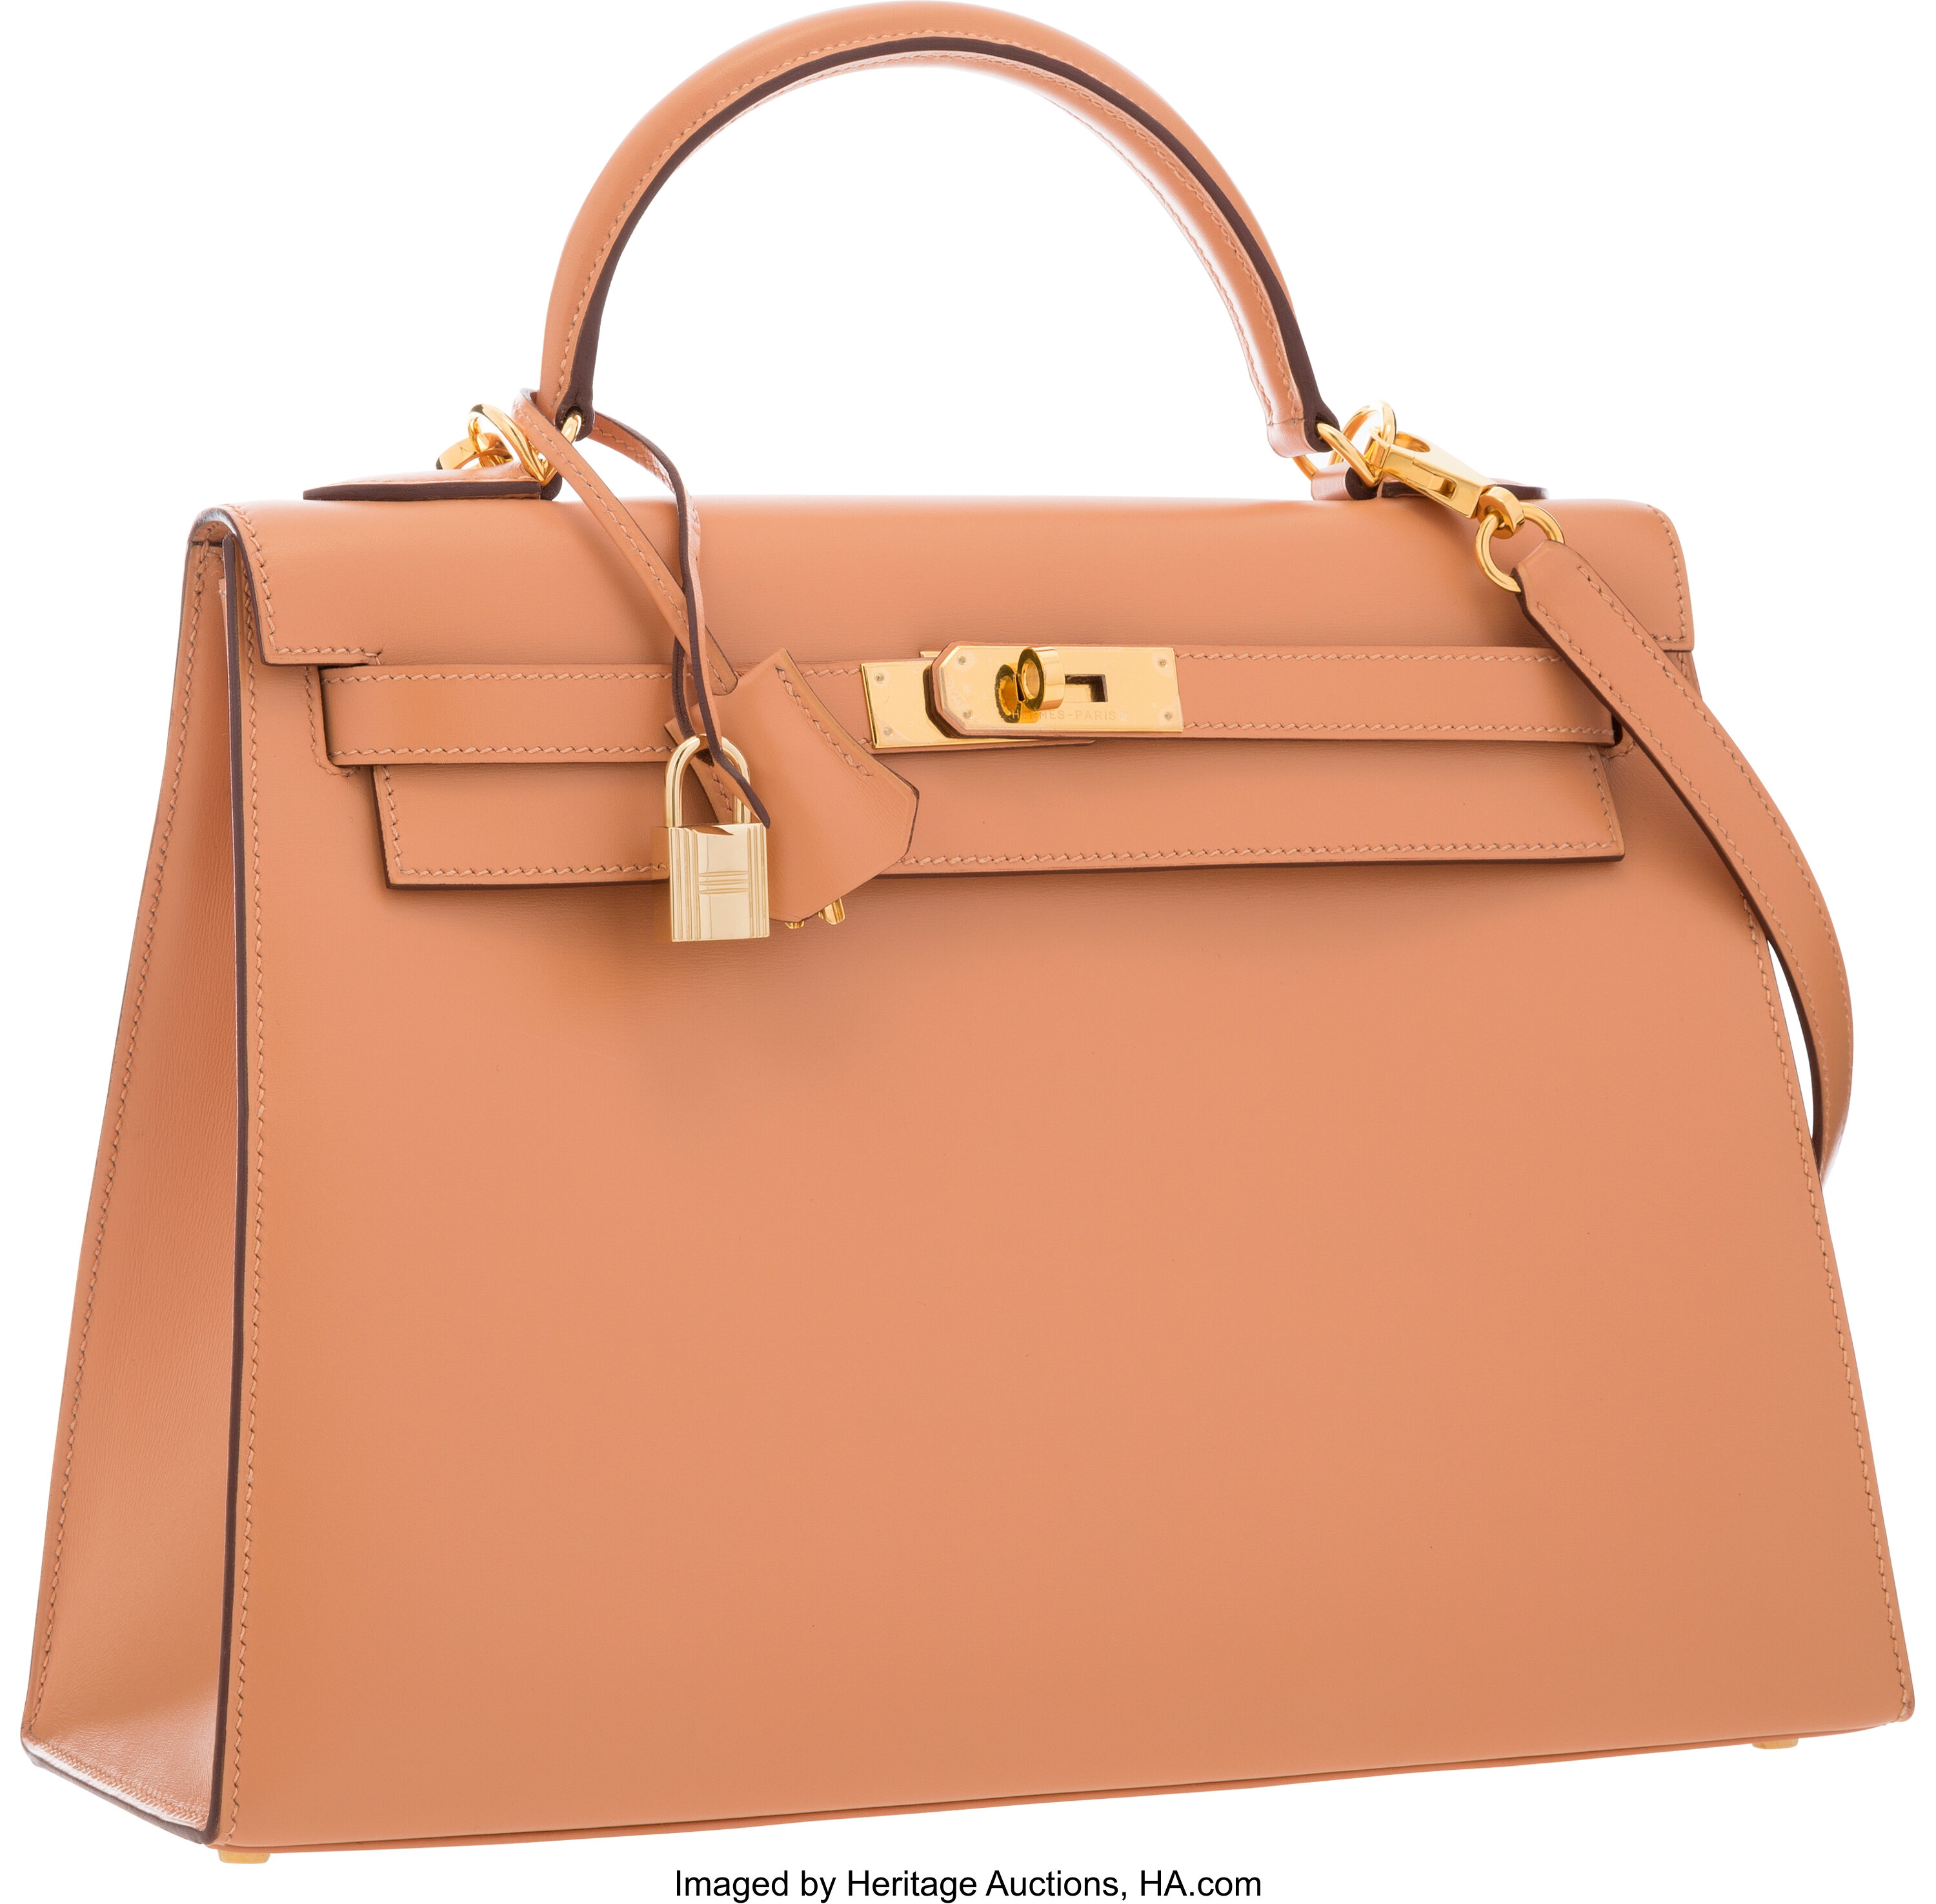 Hermes Kelly Sellier 25 Terre Cuite Ostrich Gold Hardware